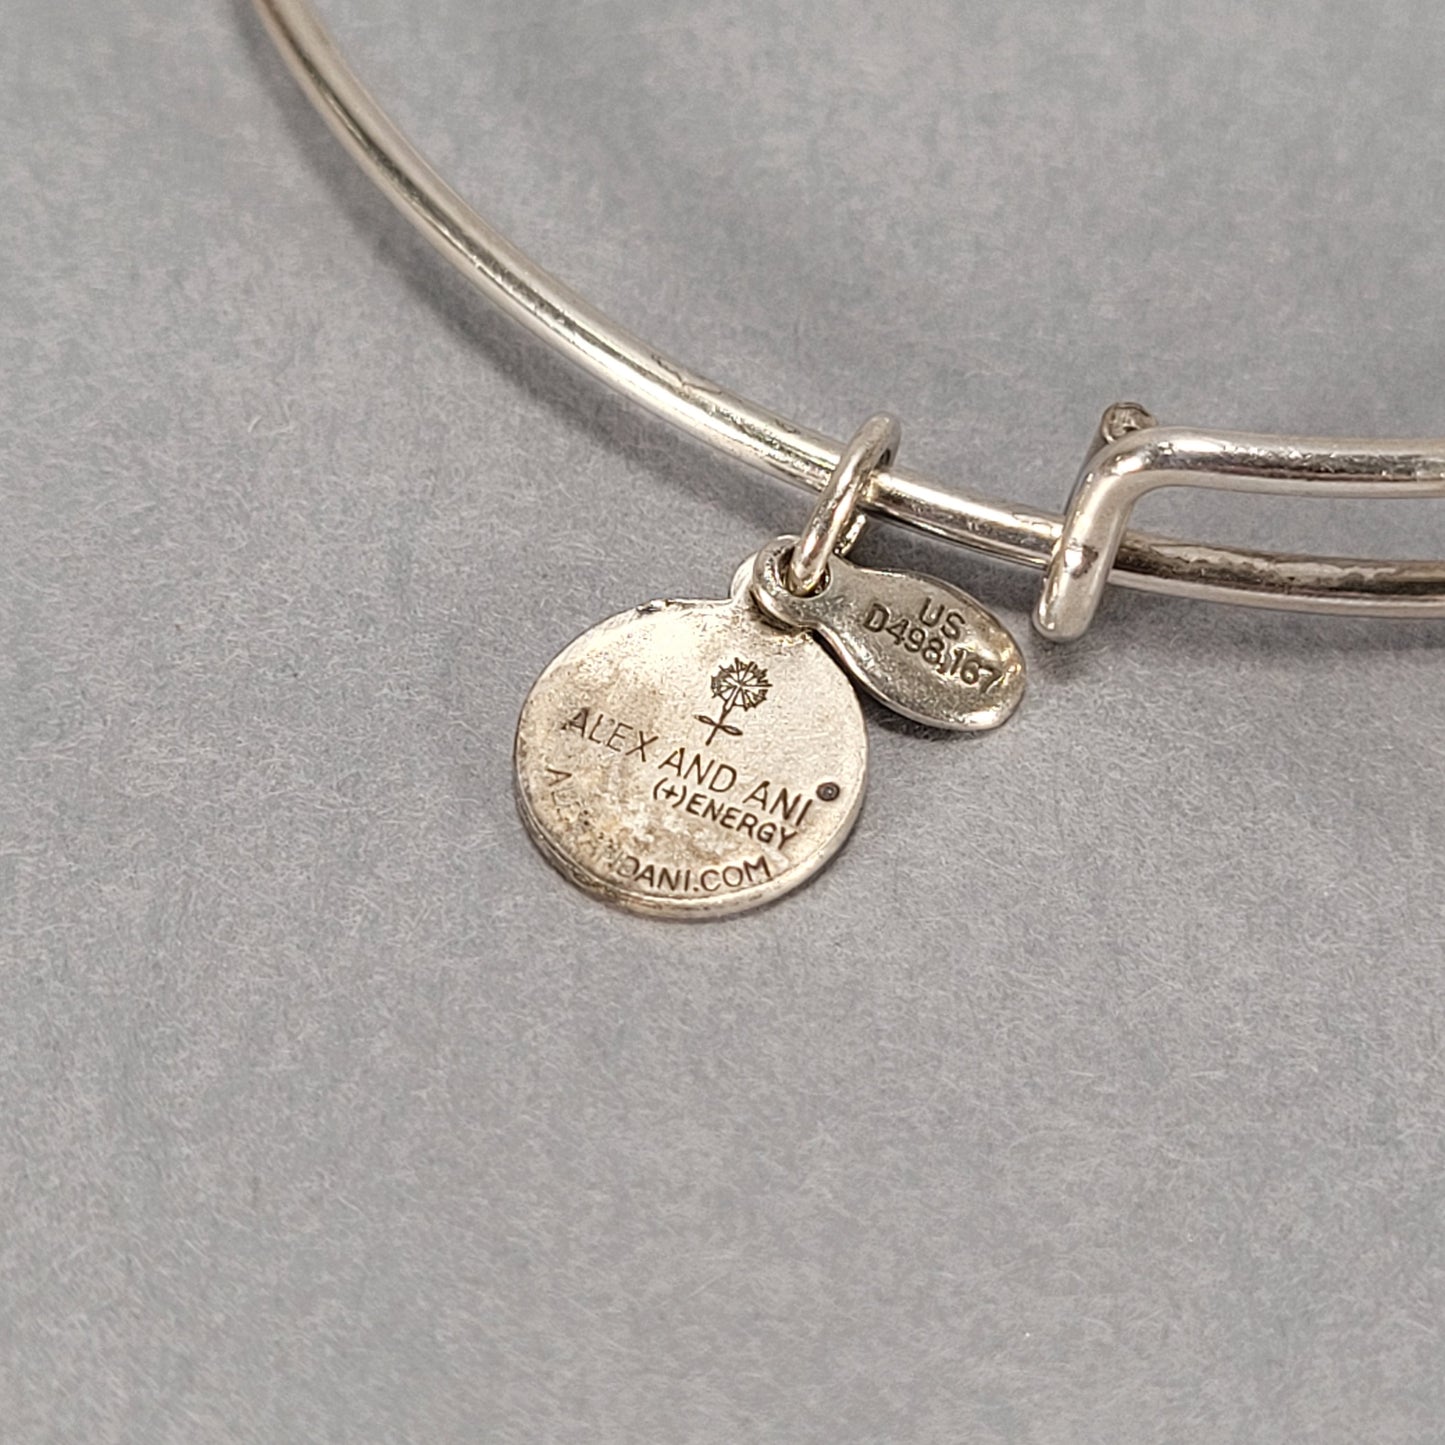 Alex & Ani Adjustable Sterling Silver Bangle and Charms